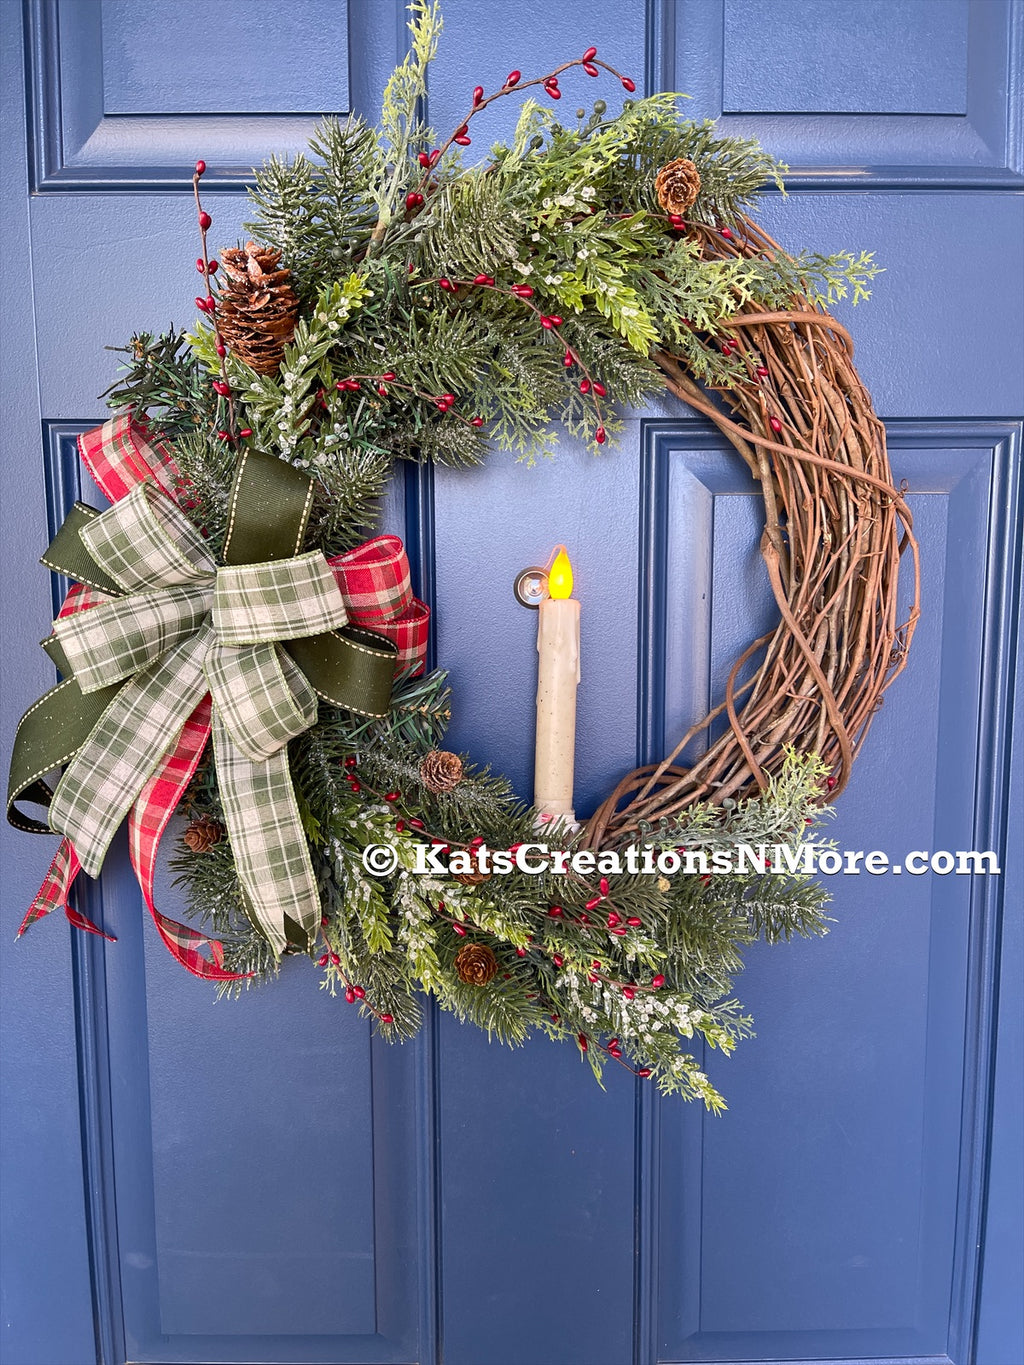 Christmas Grapevine Wreath with Artificial Pine Branches, Red Berries, Pinecones, with a Red, White and Green Bow and an Artificial Battery Operated Candle in the Center on a Blue Door